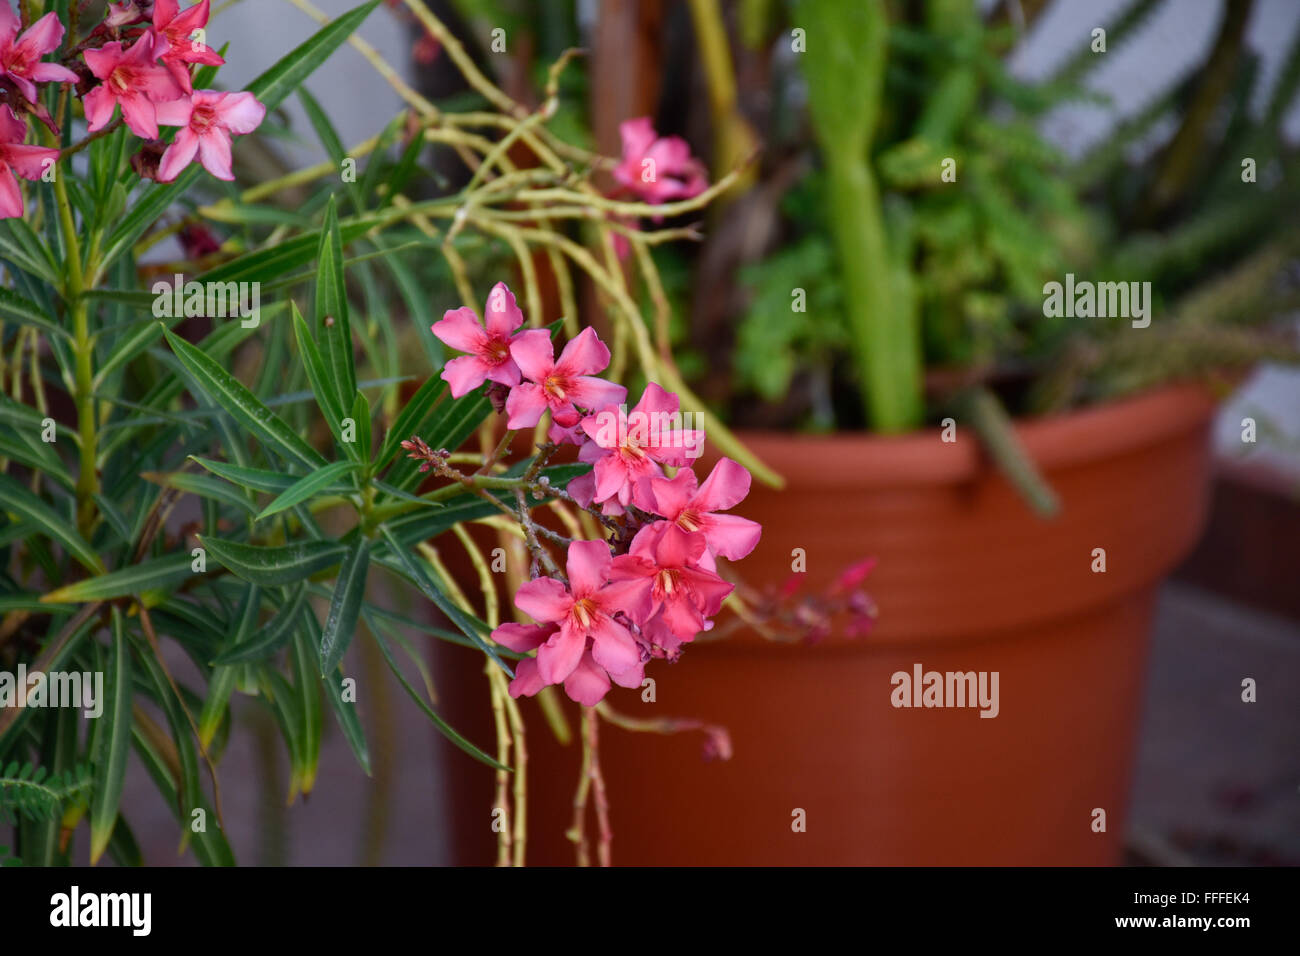 Poisonous Adelfa (Nerium oleander) flowering plant growing in Acapulco, Mexico Stock Photo